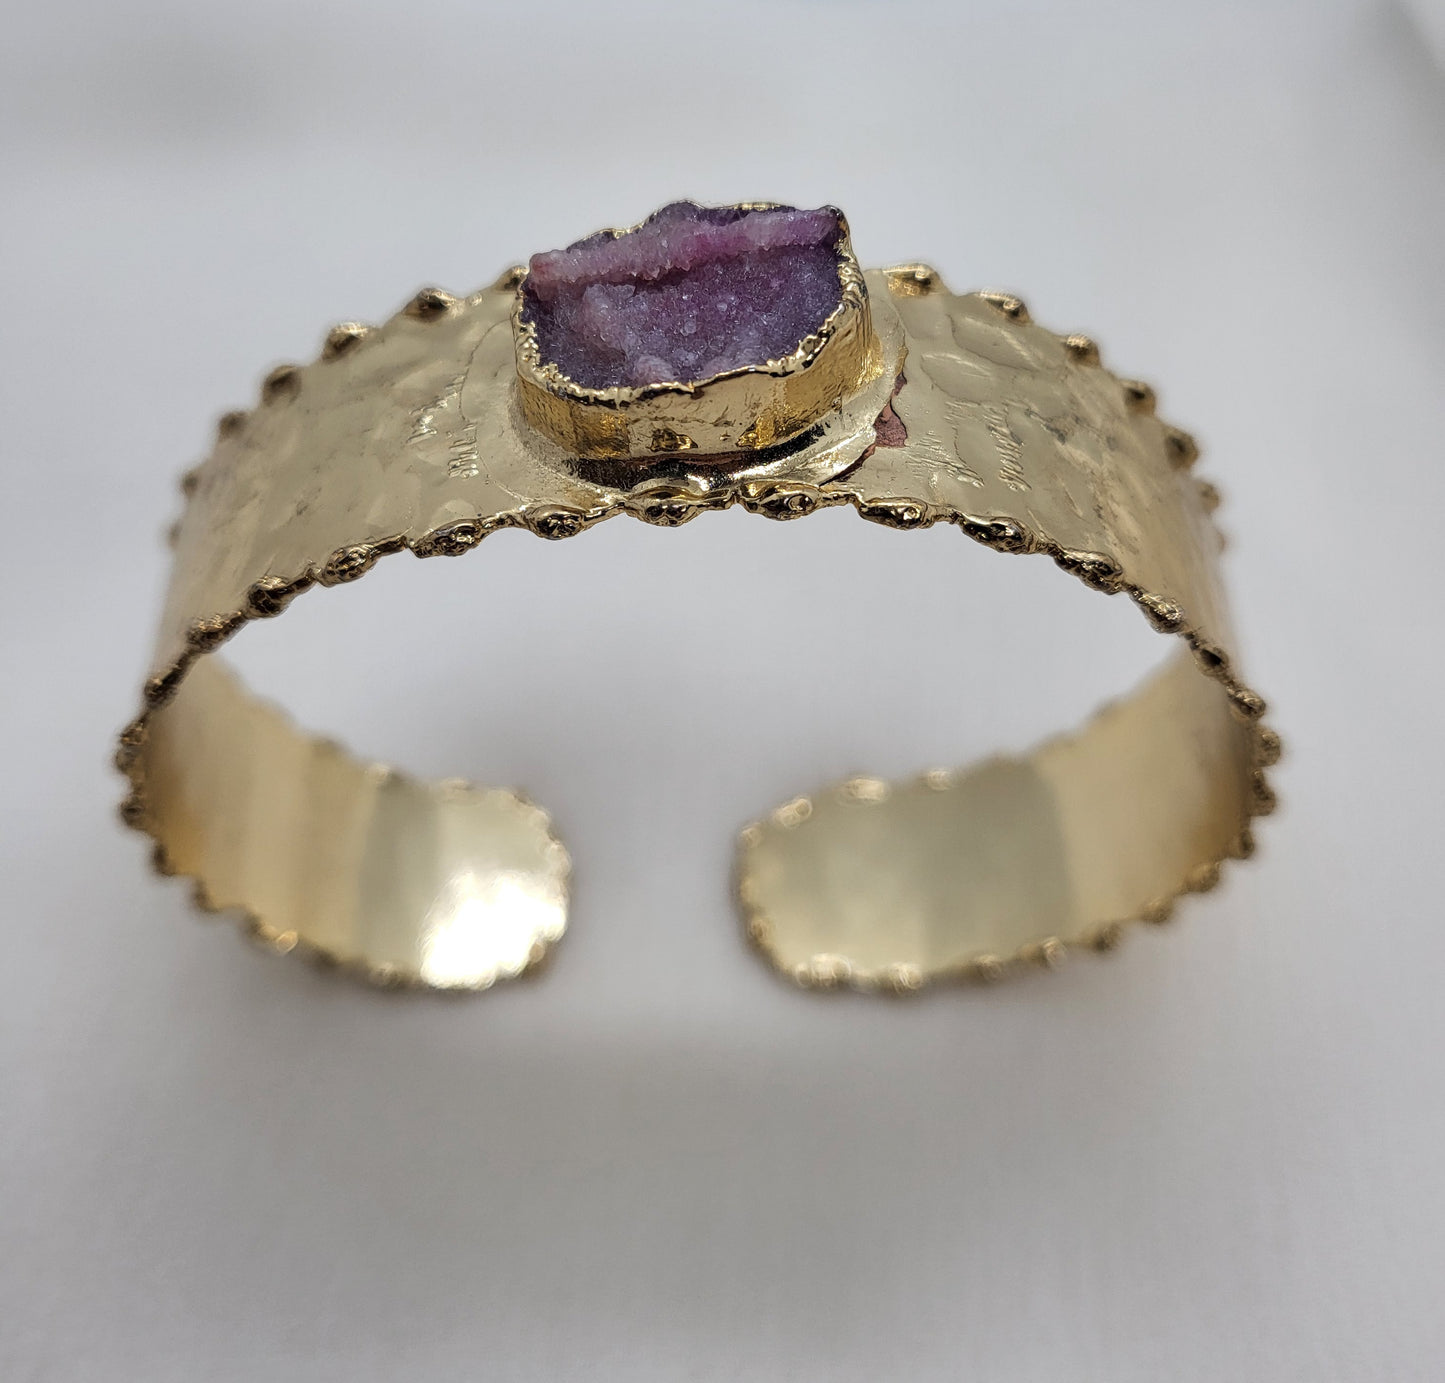 THE BUTTERFLY EFFECT JEWELRY - Gold handcuff with purple druzy stone